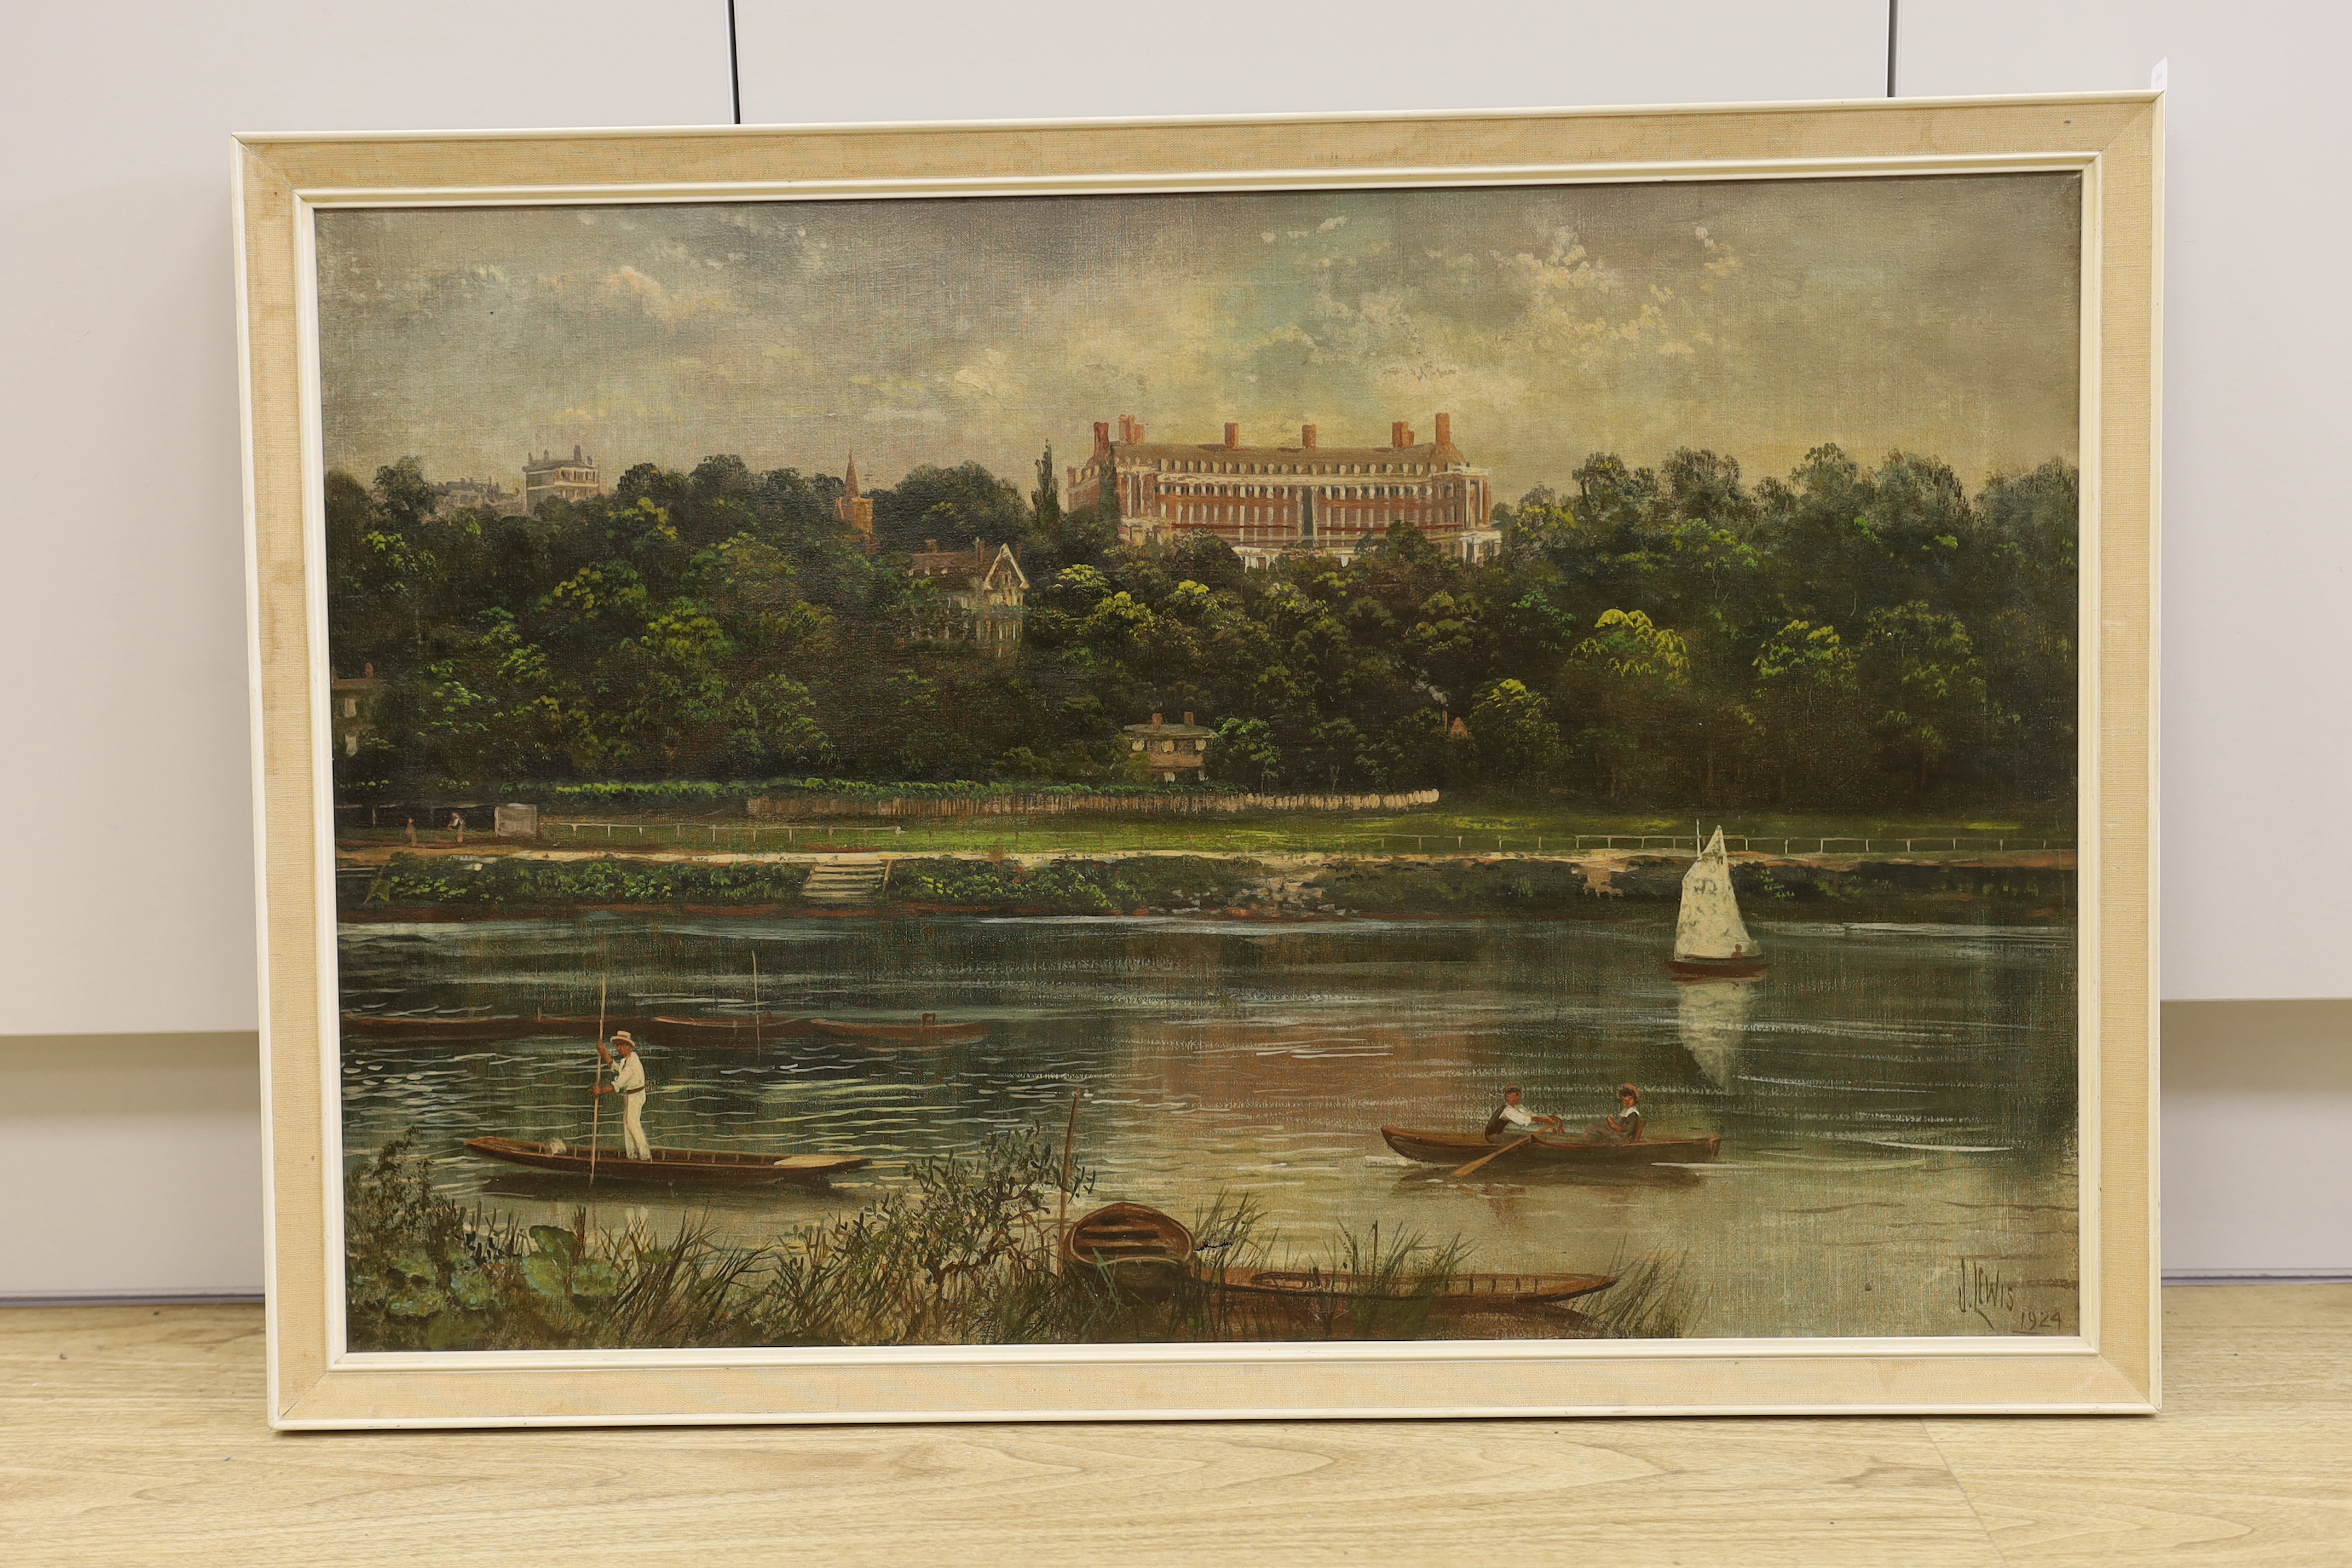 James Isaiah Lewis (1860-1934) oil on canvas, Thames boating scene, signed and dated 1924, 75 x - Image 2 of 4